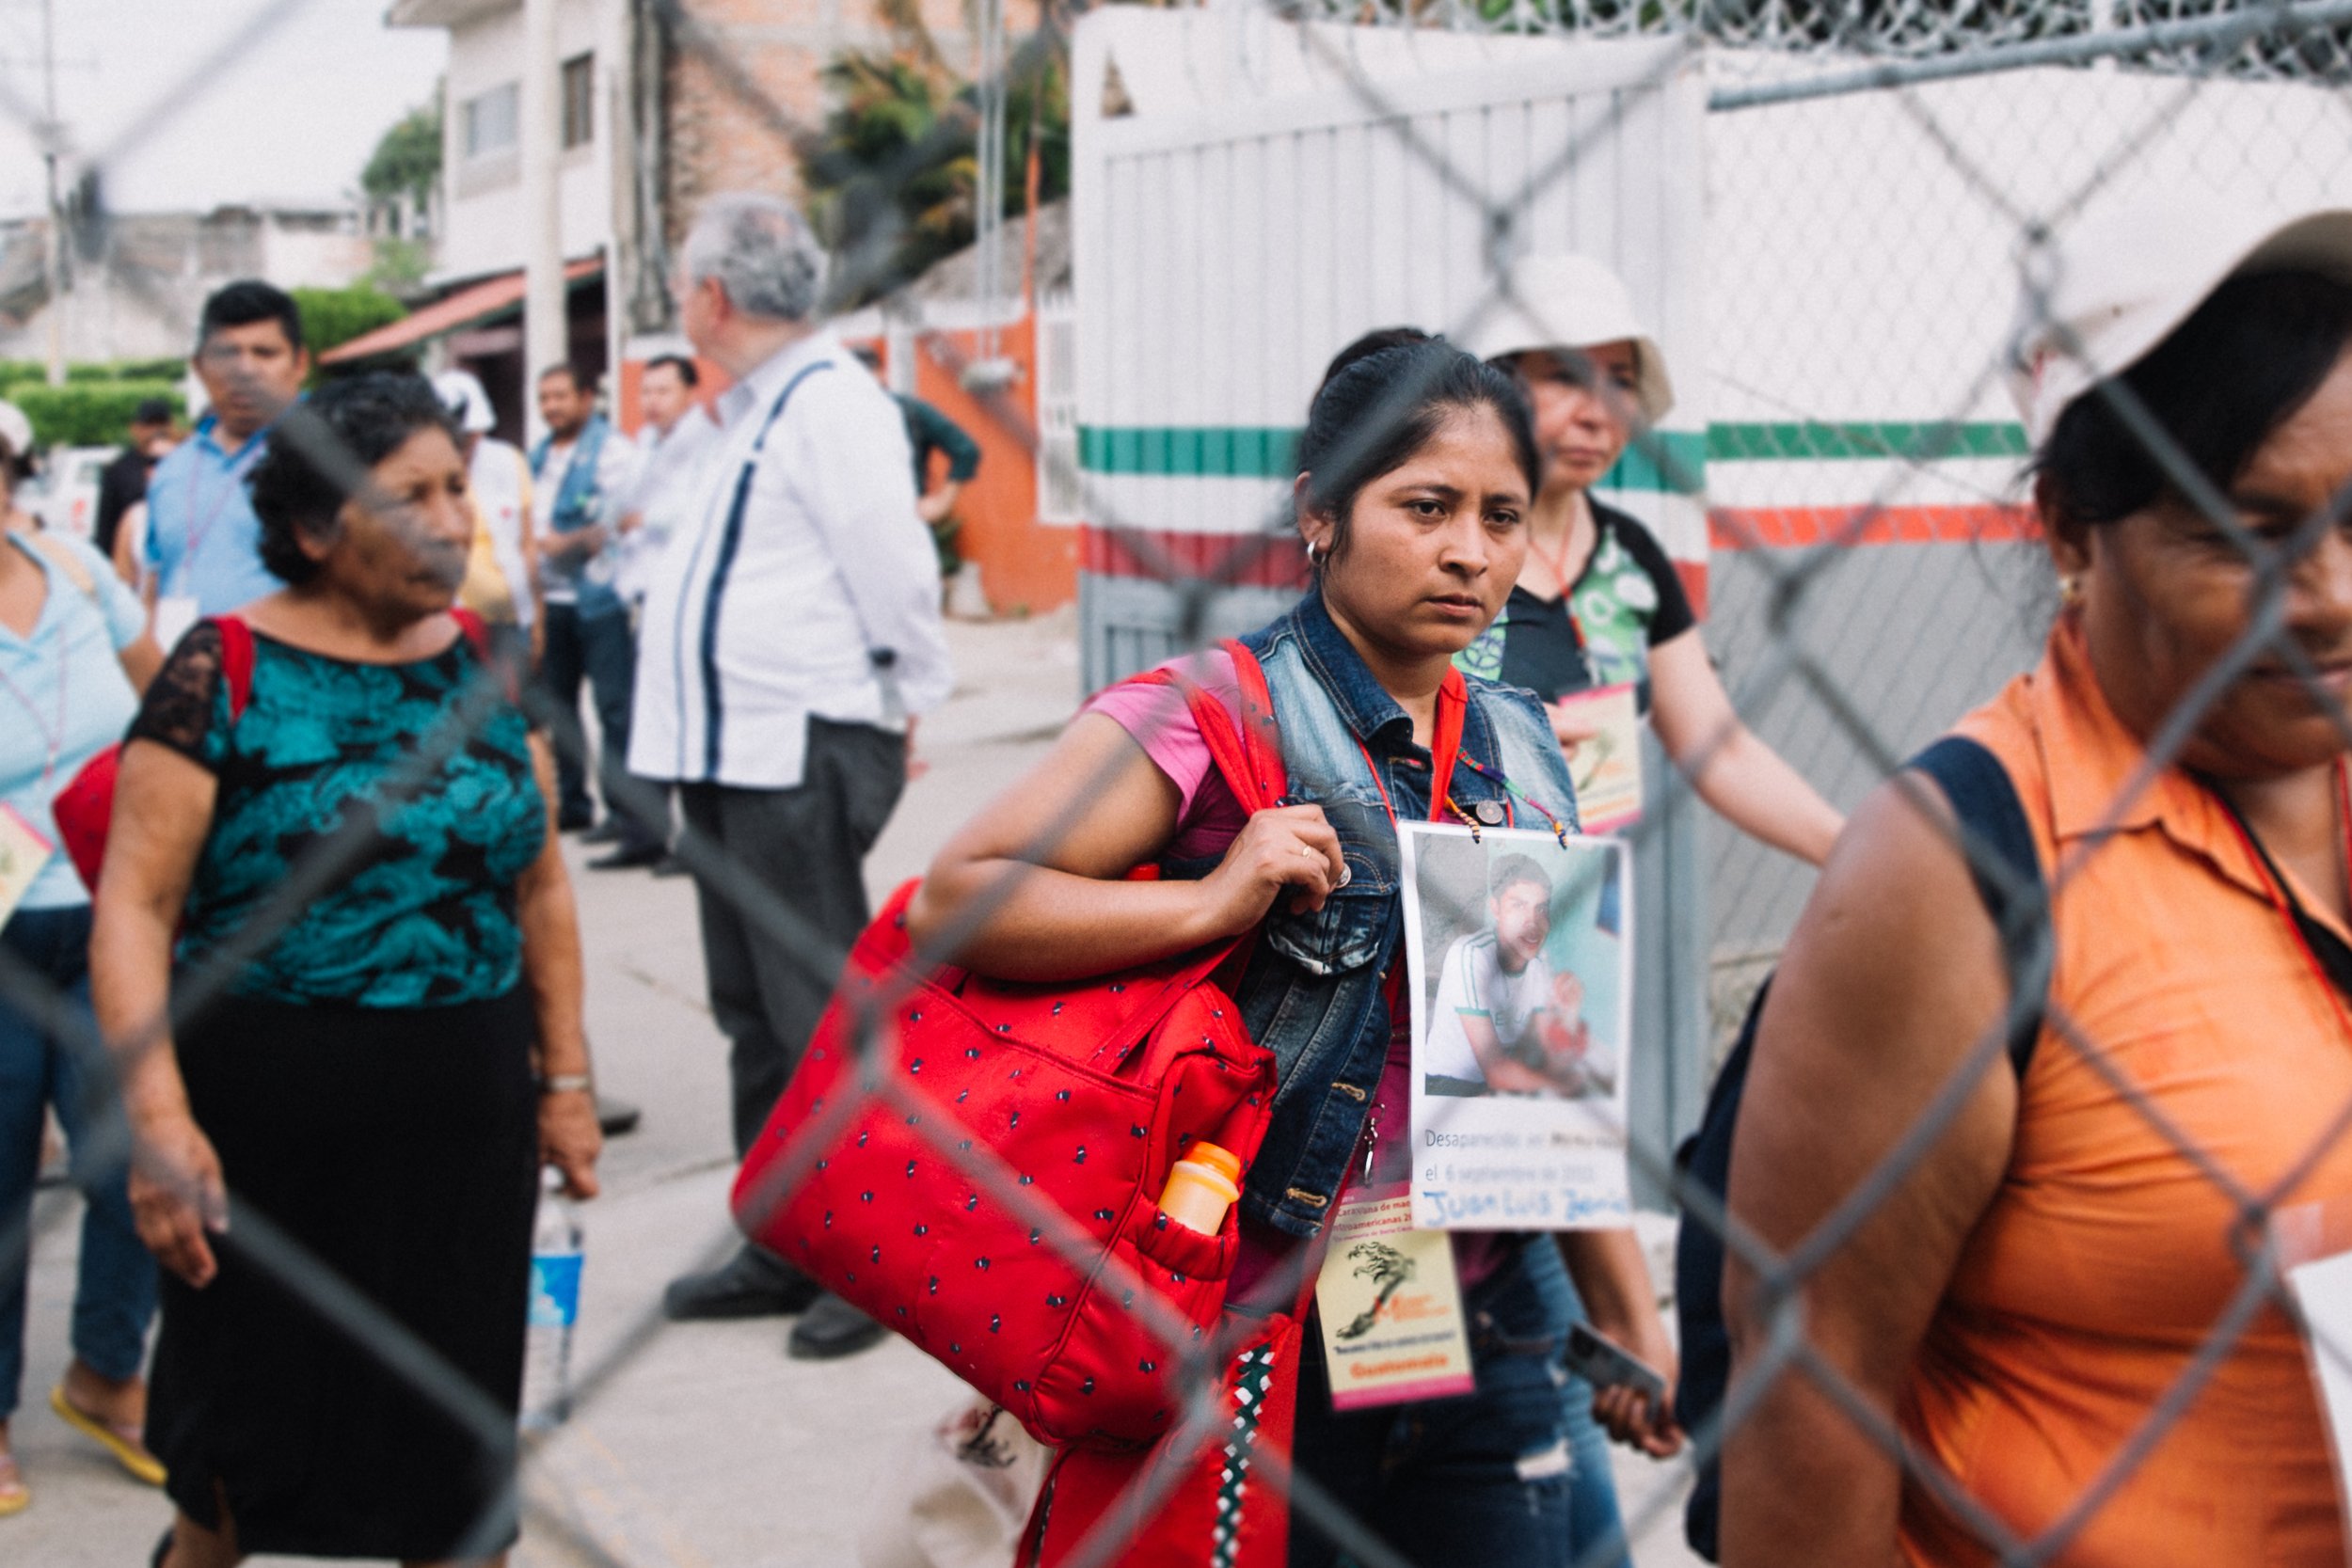  After traveling thousands of kilometers from the southernmost point of Mexico to the northernmost point, the Caravana de Madres de Migrantes Desaparecidos finally crosses the border back into Guatemala, marking the end of their annual journey in sea